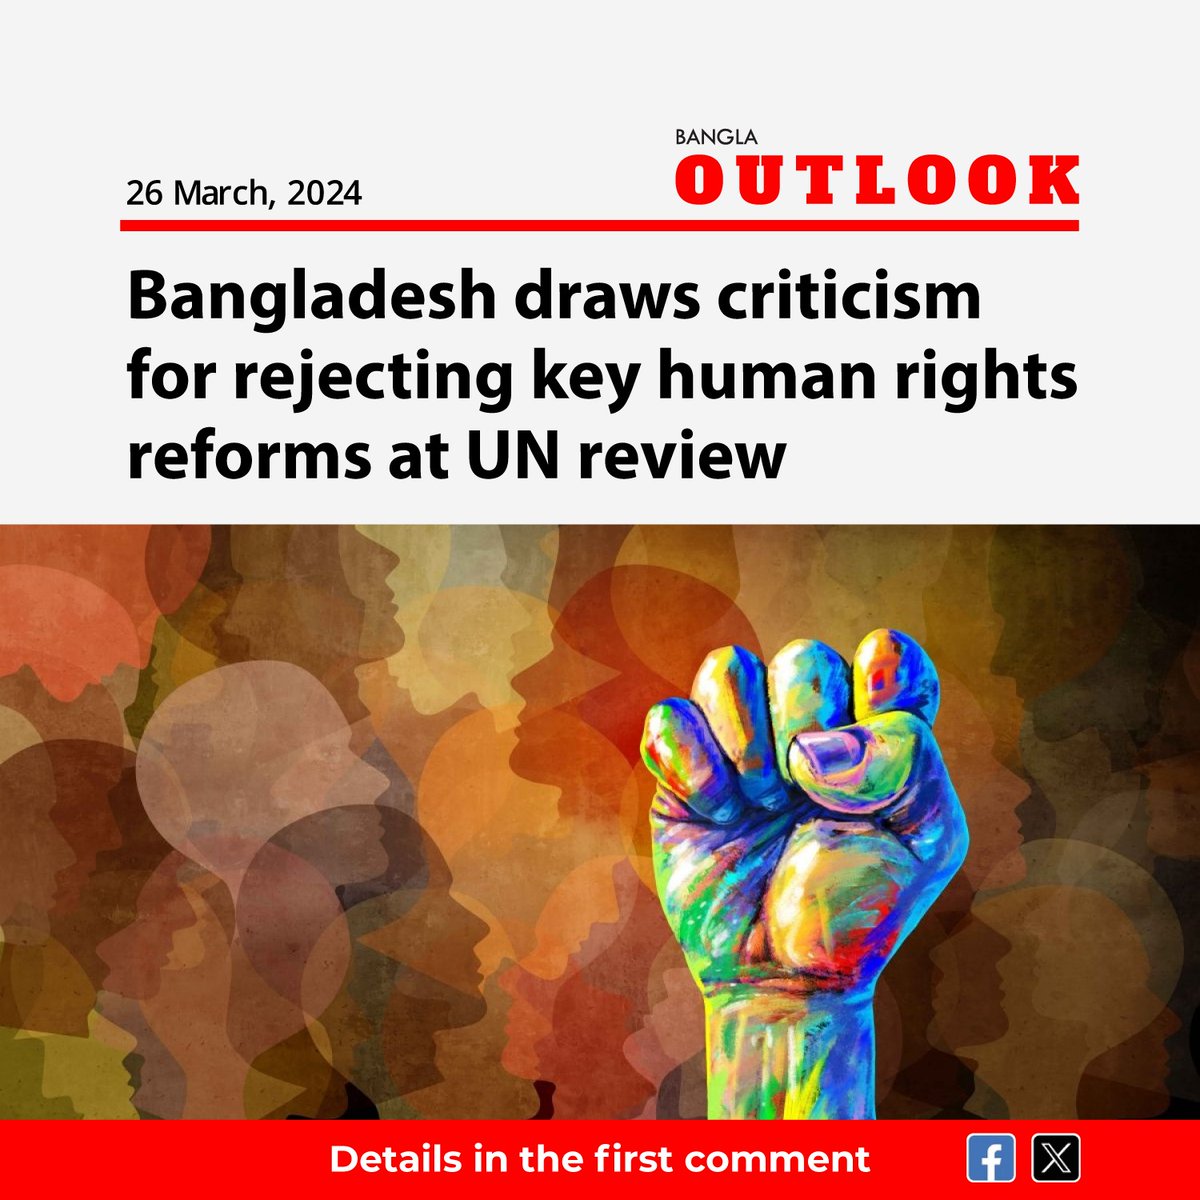 The CIVICUS and AHRC have criticized the Bangladesh government's lack of transparency and accountability highlighted during its recent Universal Periodic Review (UPR) at the UN Human Rights Council. They expressed concern over the ruling government Awami League's rejection of